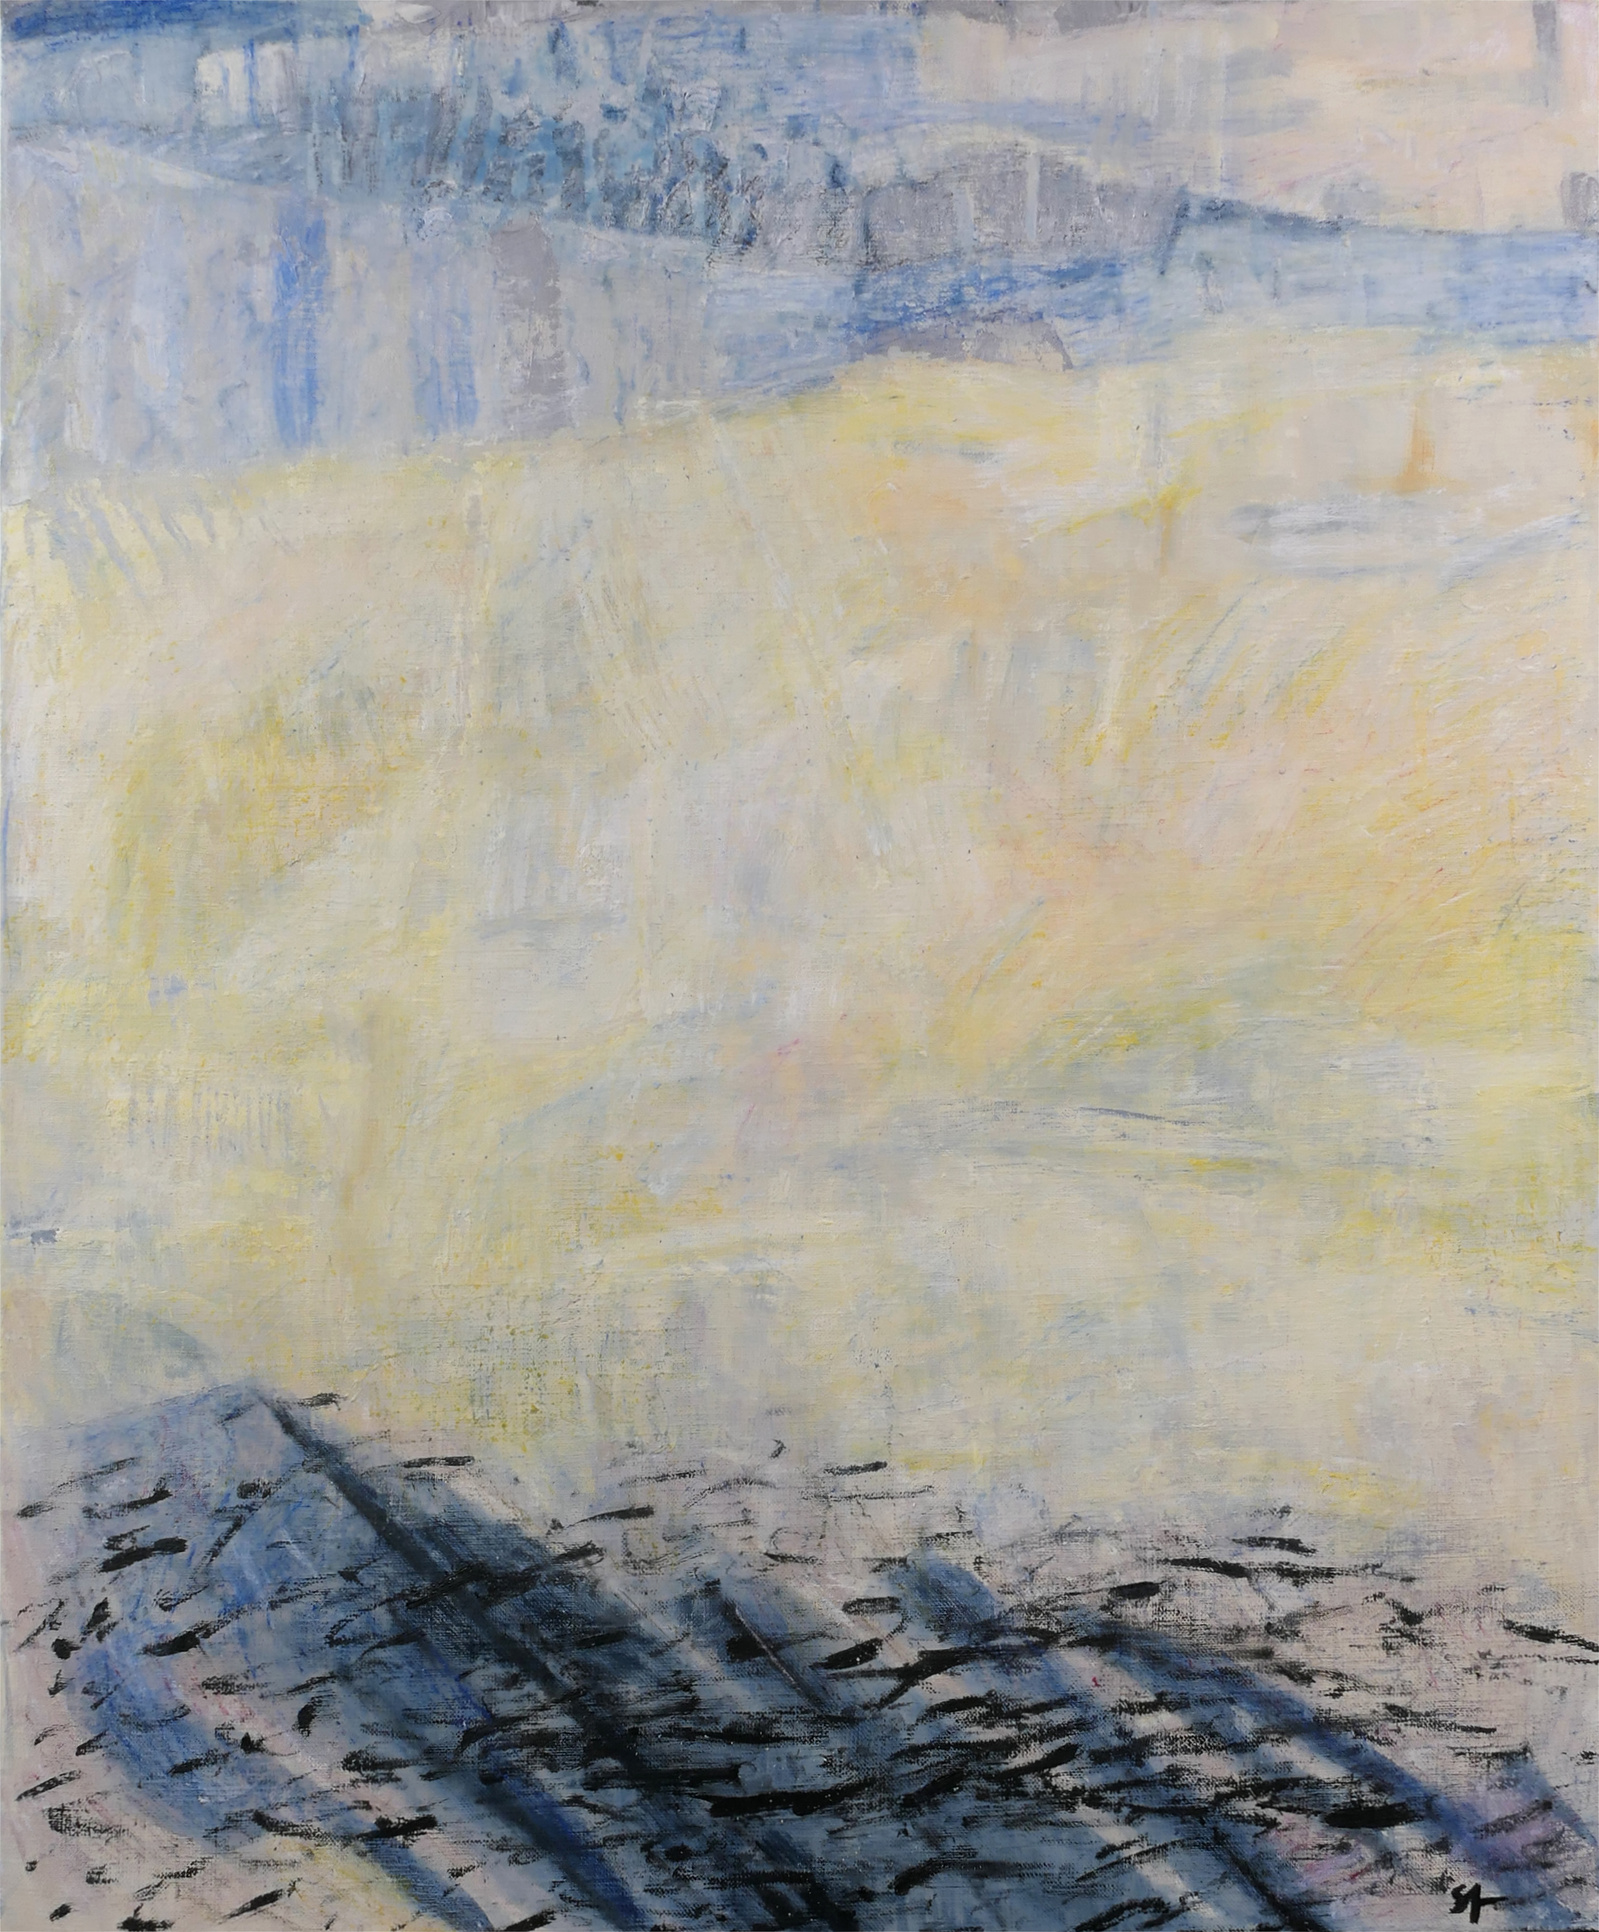 Photo of Su Ai's oil painting entitled "Morning". This is an abstract composition in yellow, white, blue and black colors. Strongly layered brings feeling of morning's bright light and freshness.